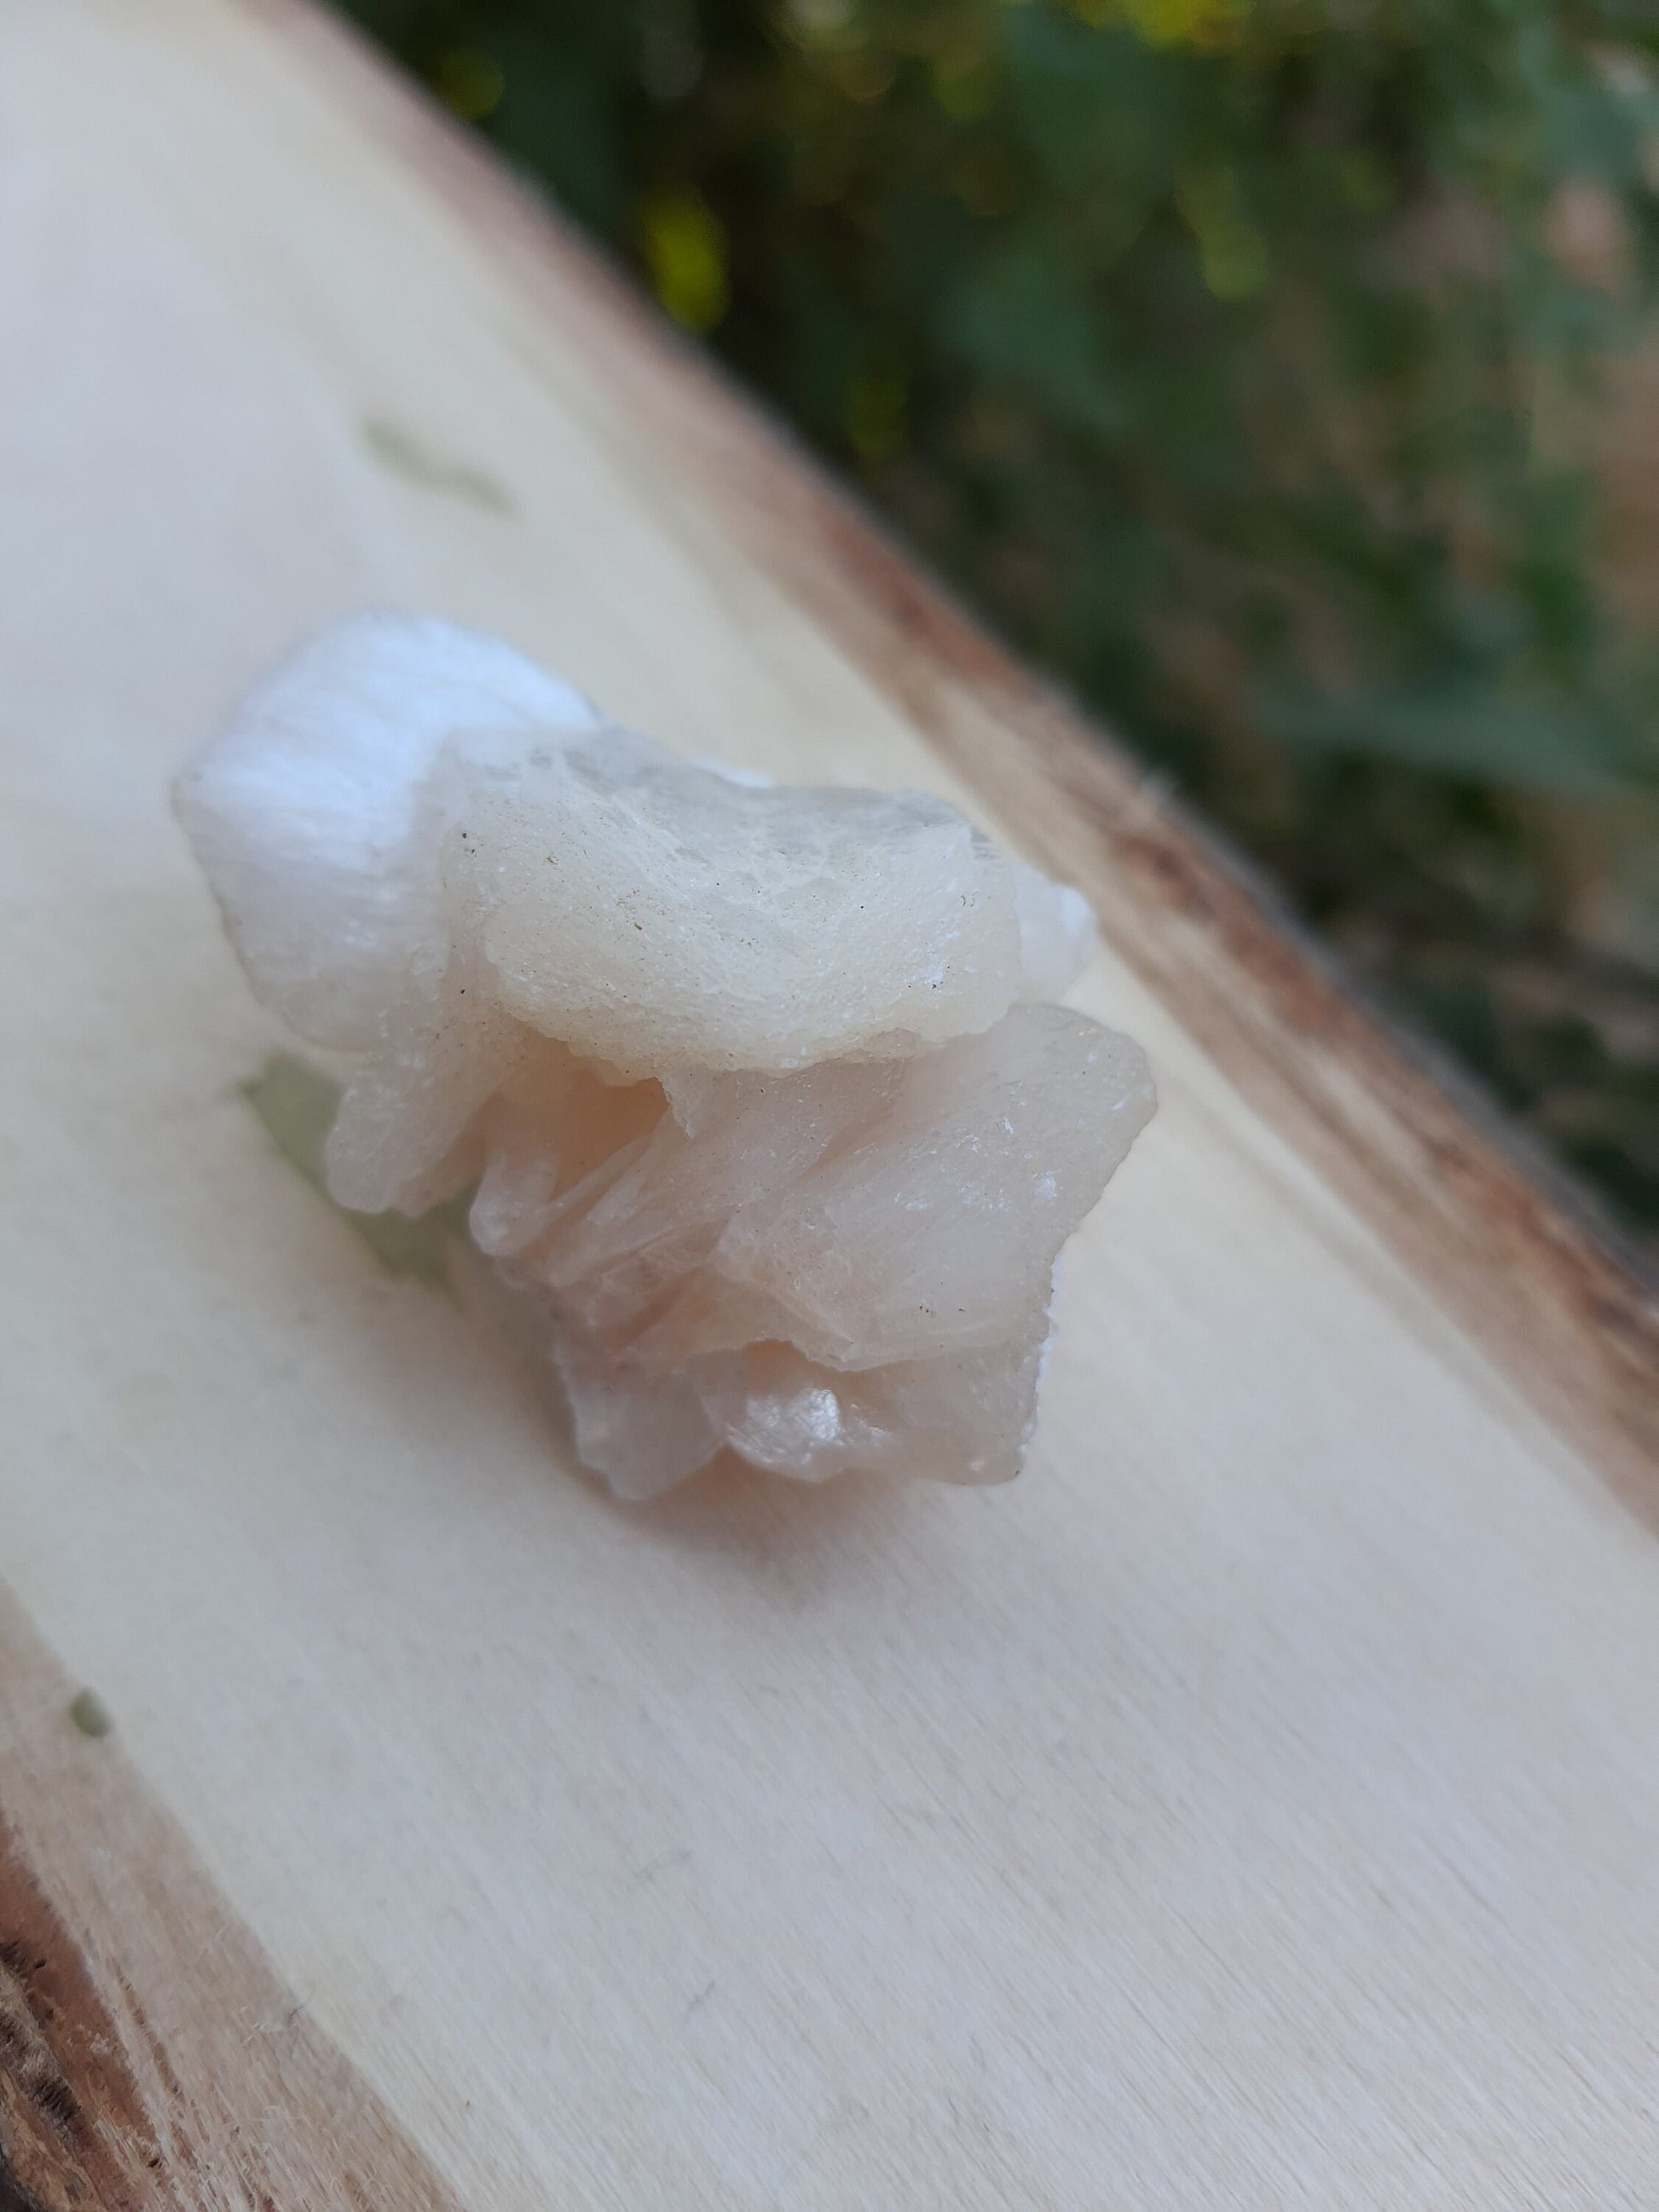 Small Natural Peach Stilbite Crystal, 26g Double Terminated Mineral, Healing Crystal, Mineral Specimen